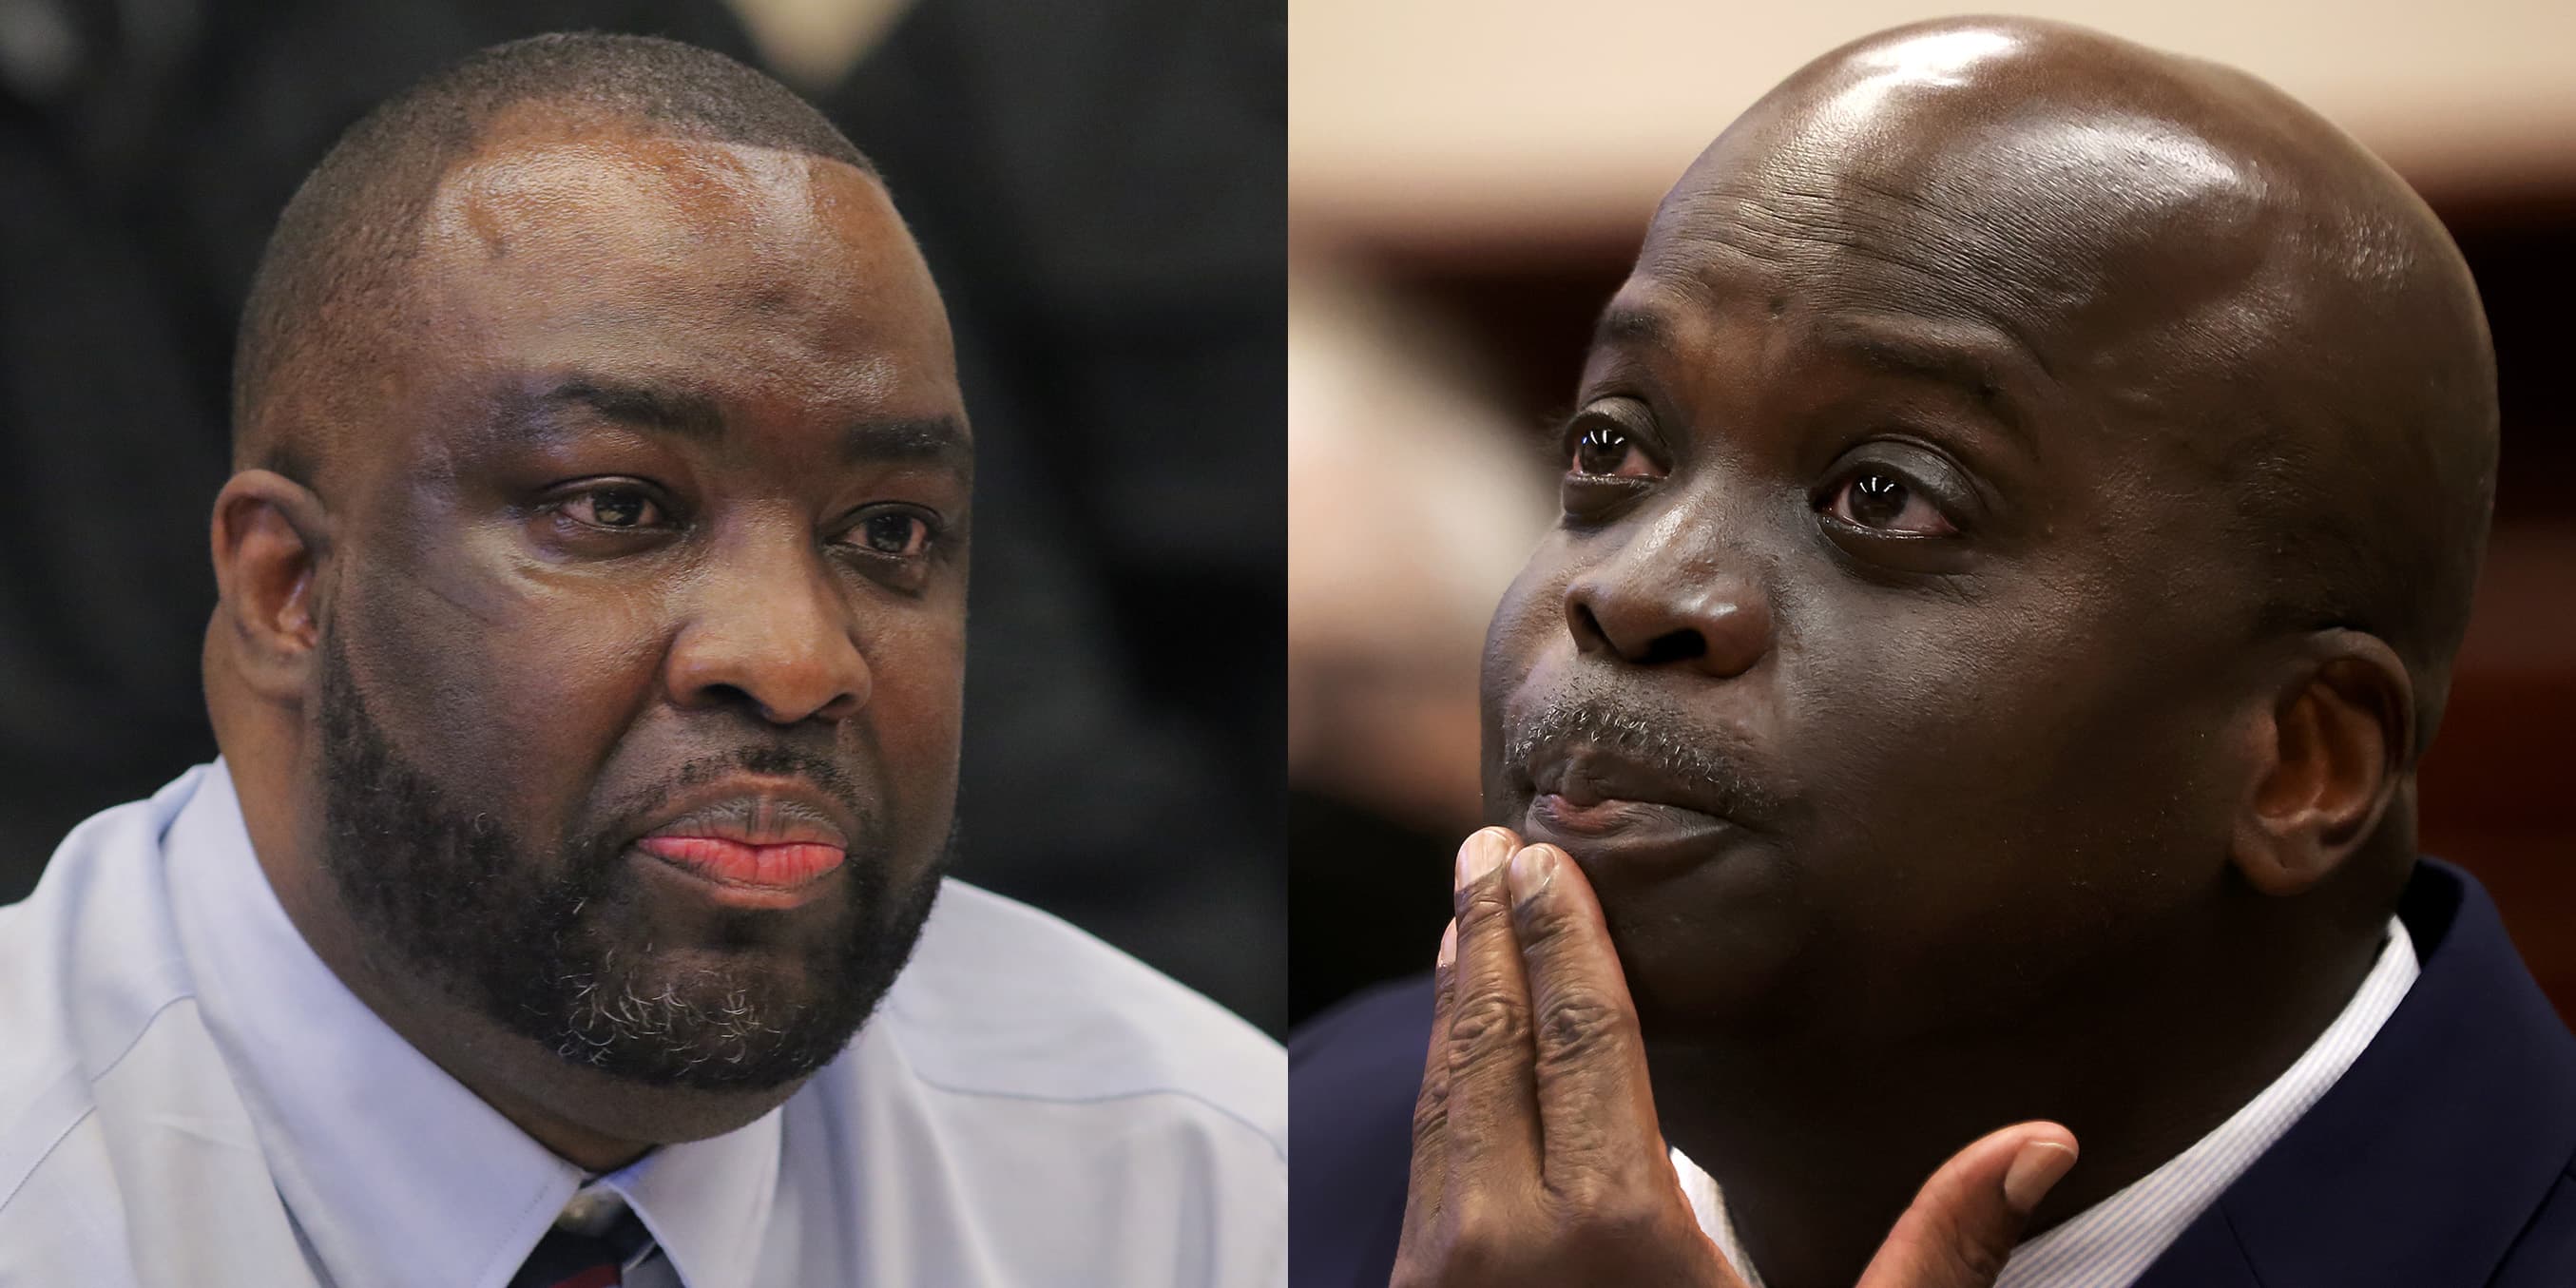 William Allen and Thomas Koonce at their respective Governor's Council hearings. (Allen photo by Lane Turner/The Boston Globe via Getty Images. Koonce photo by David L. Ryan/The Boston Globe via Getty Images)